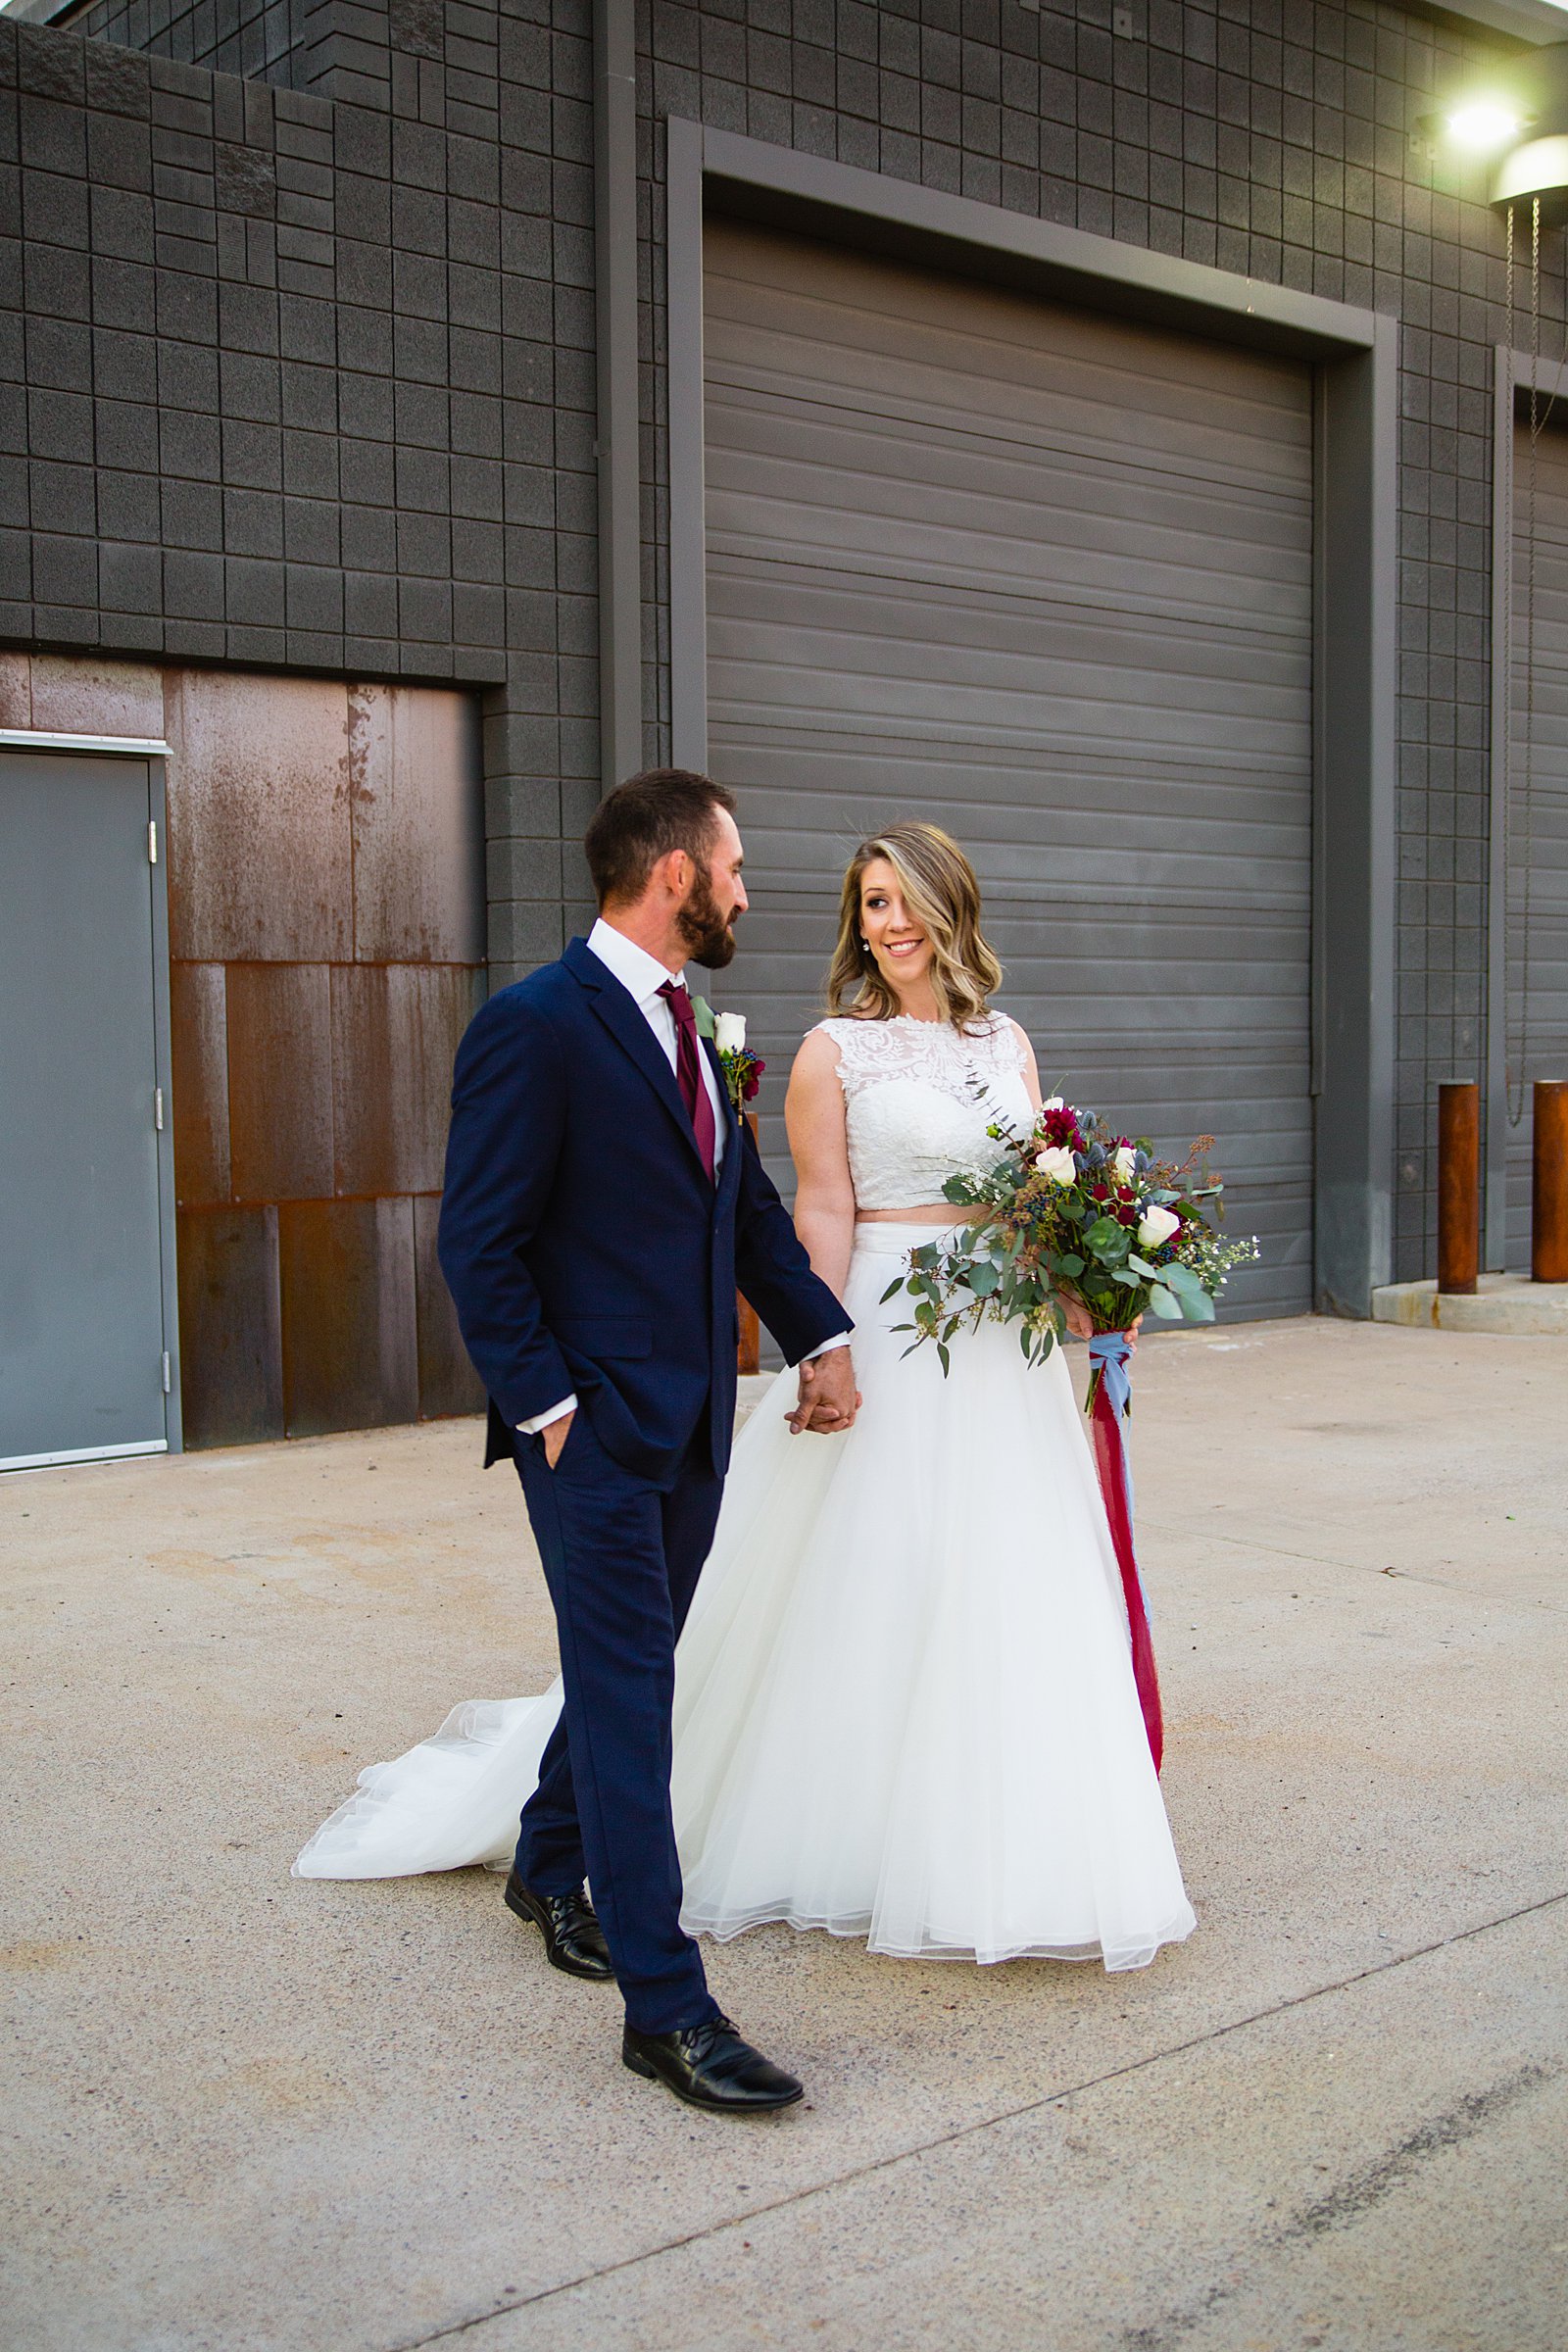 Bride and Groom walking together during their Sunkist Warehouse wedding by Mesa wedding photographer PMA Photography.